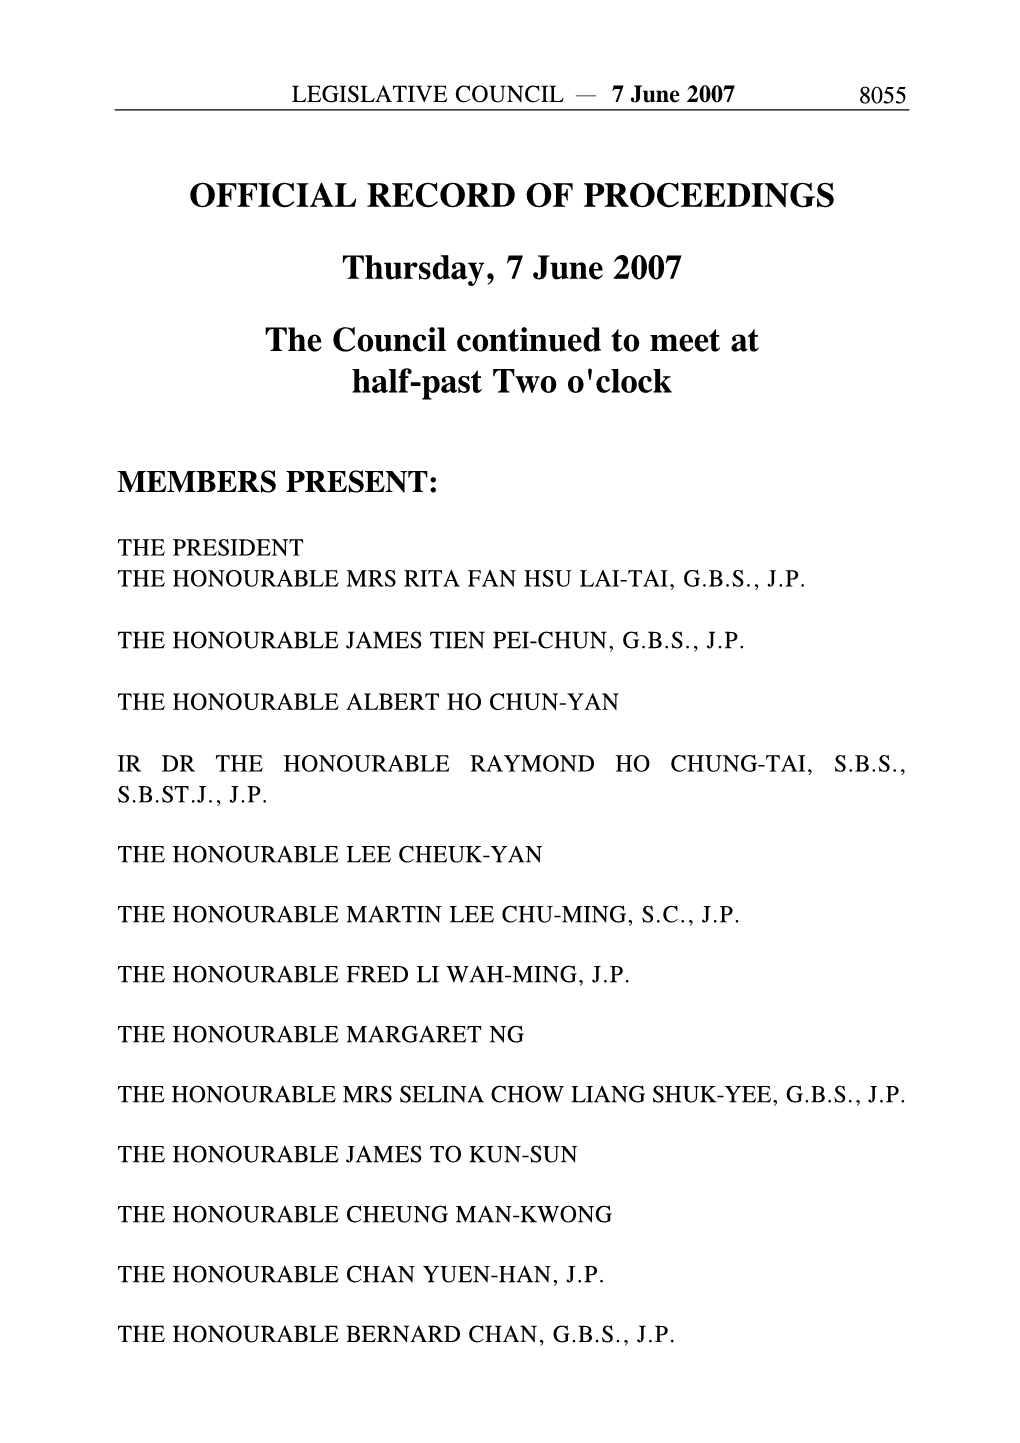 OFFICIAL RECORD of PROCEEDINGS Thursday, 7 June